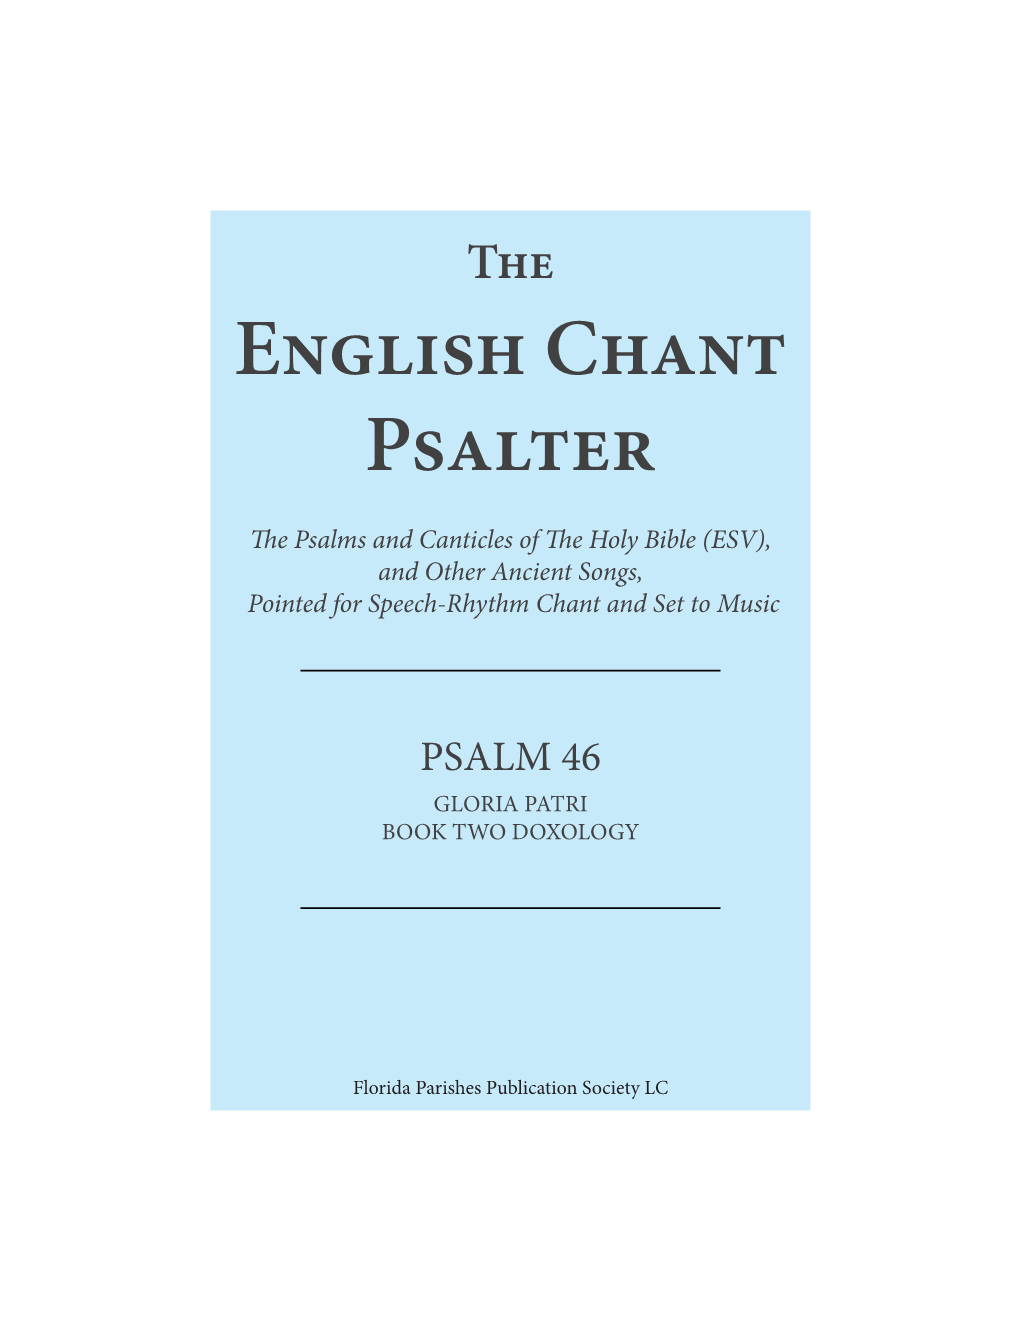 The Psalms and Canticles of the Holy Bible (ESV), and Other Ancient Songs, Pointed for Speech-Rhythm Chant and Set to Music